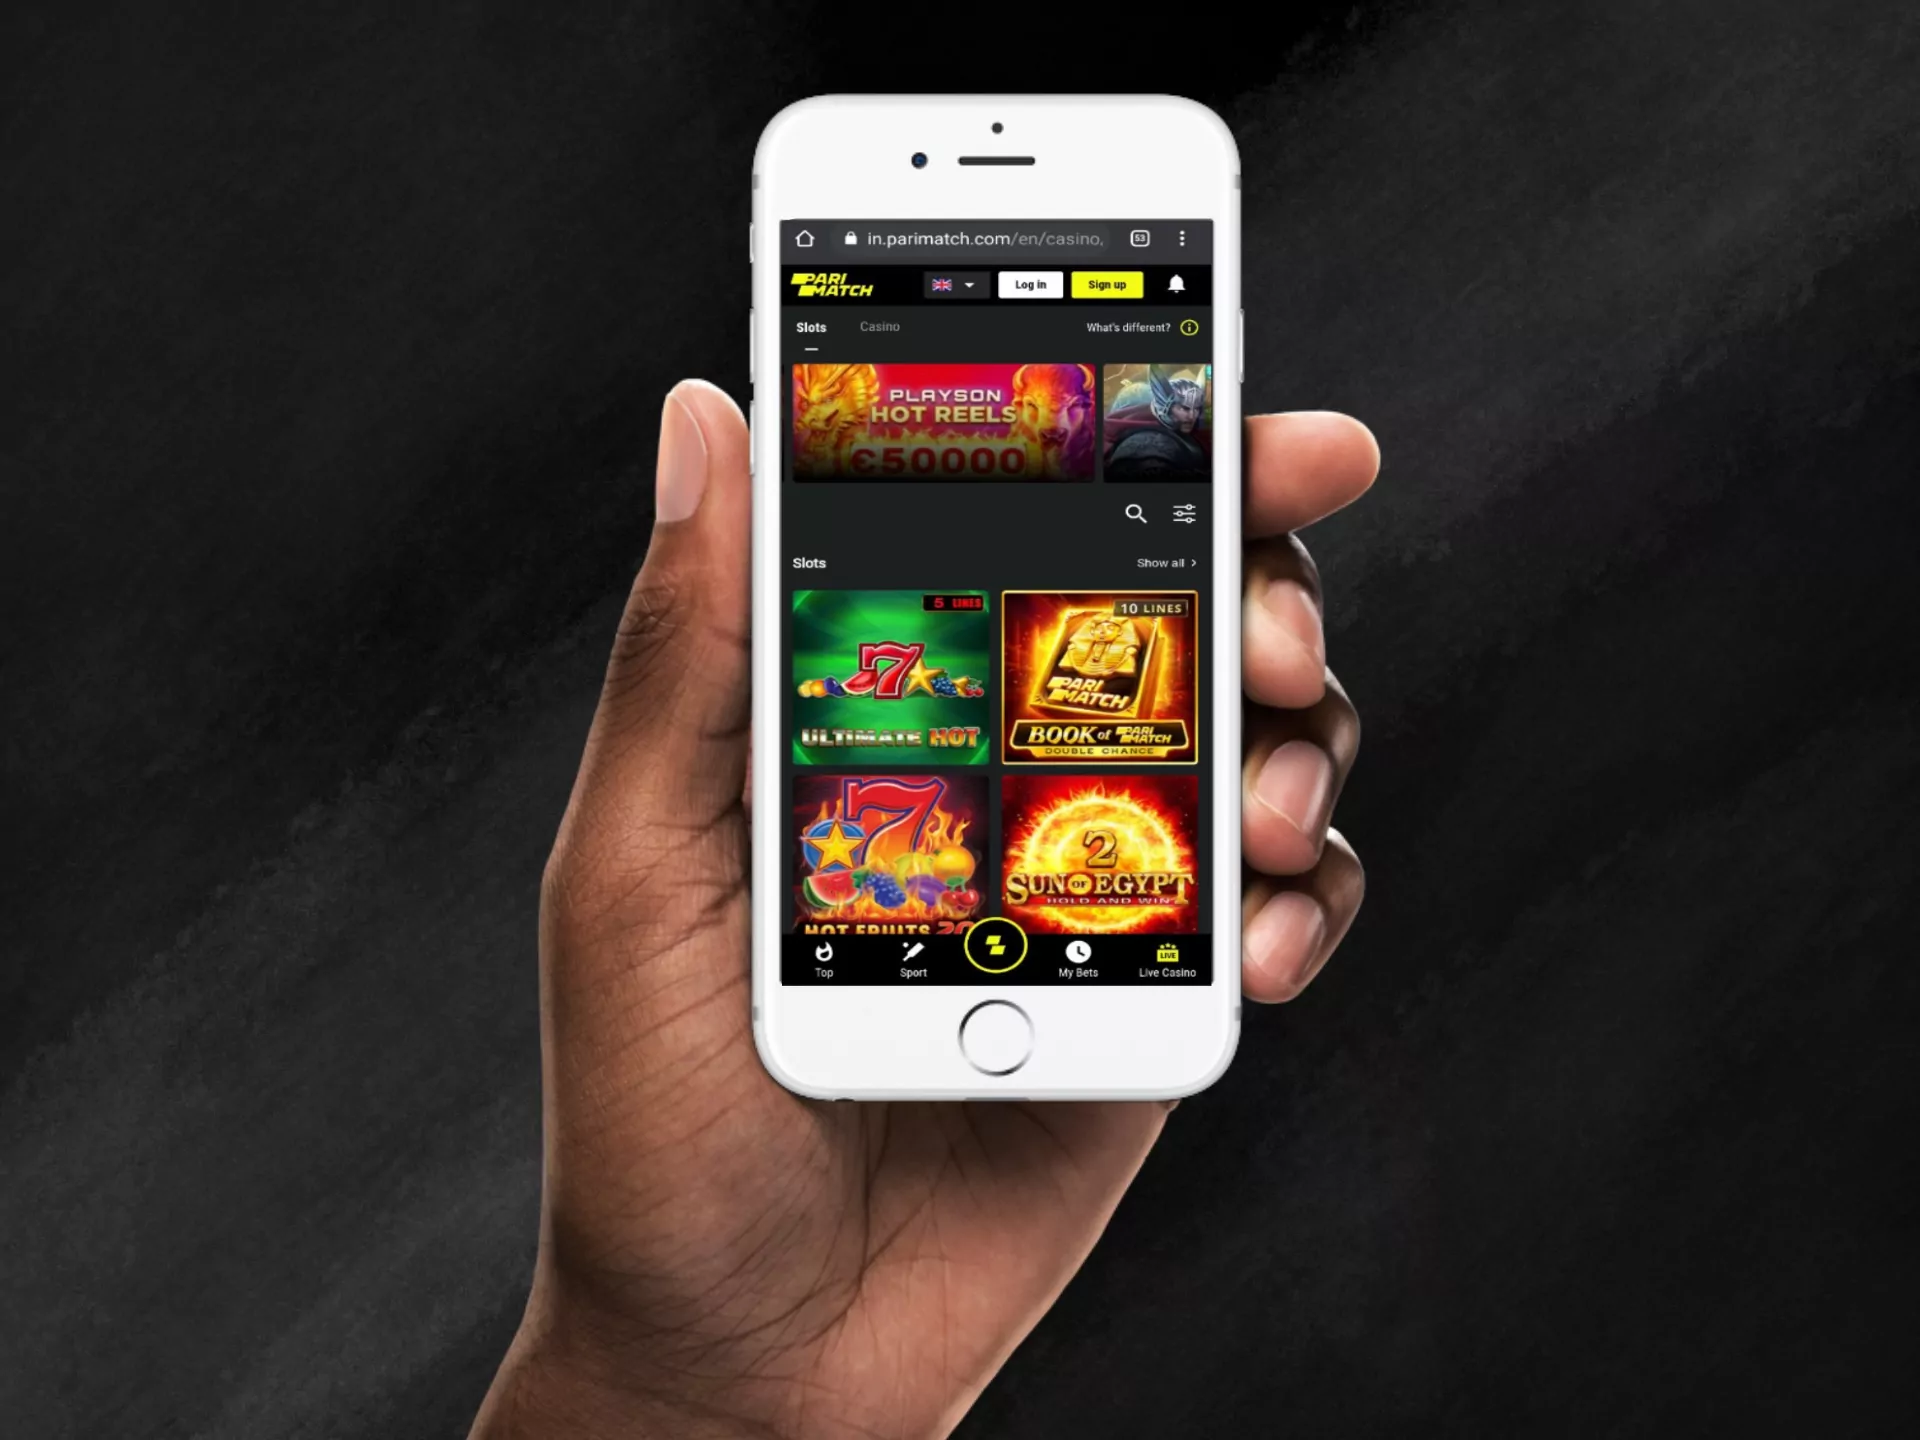 Now you can start gambling right on your iPhone.